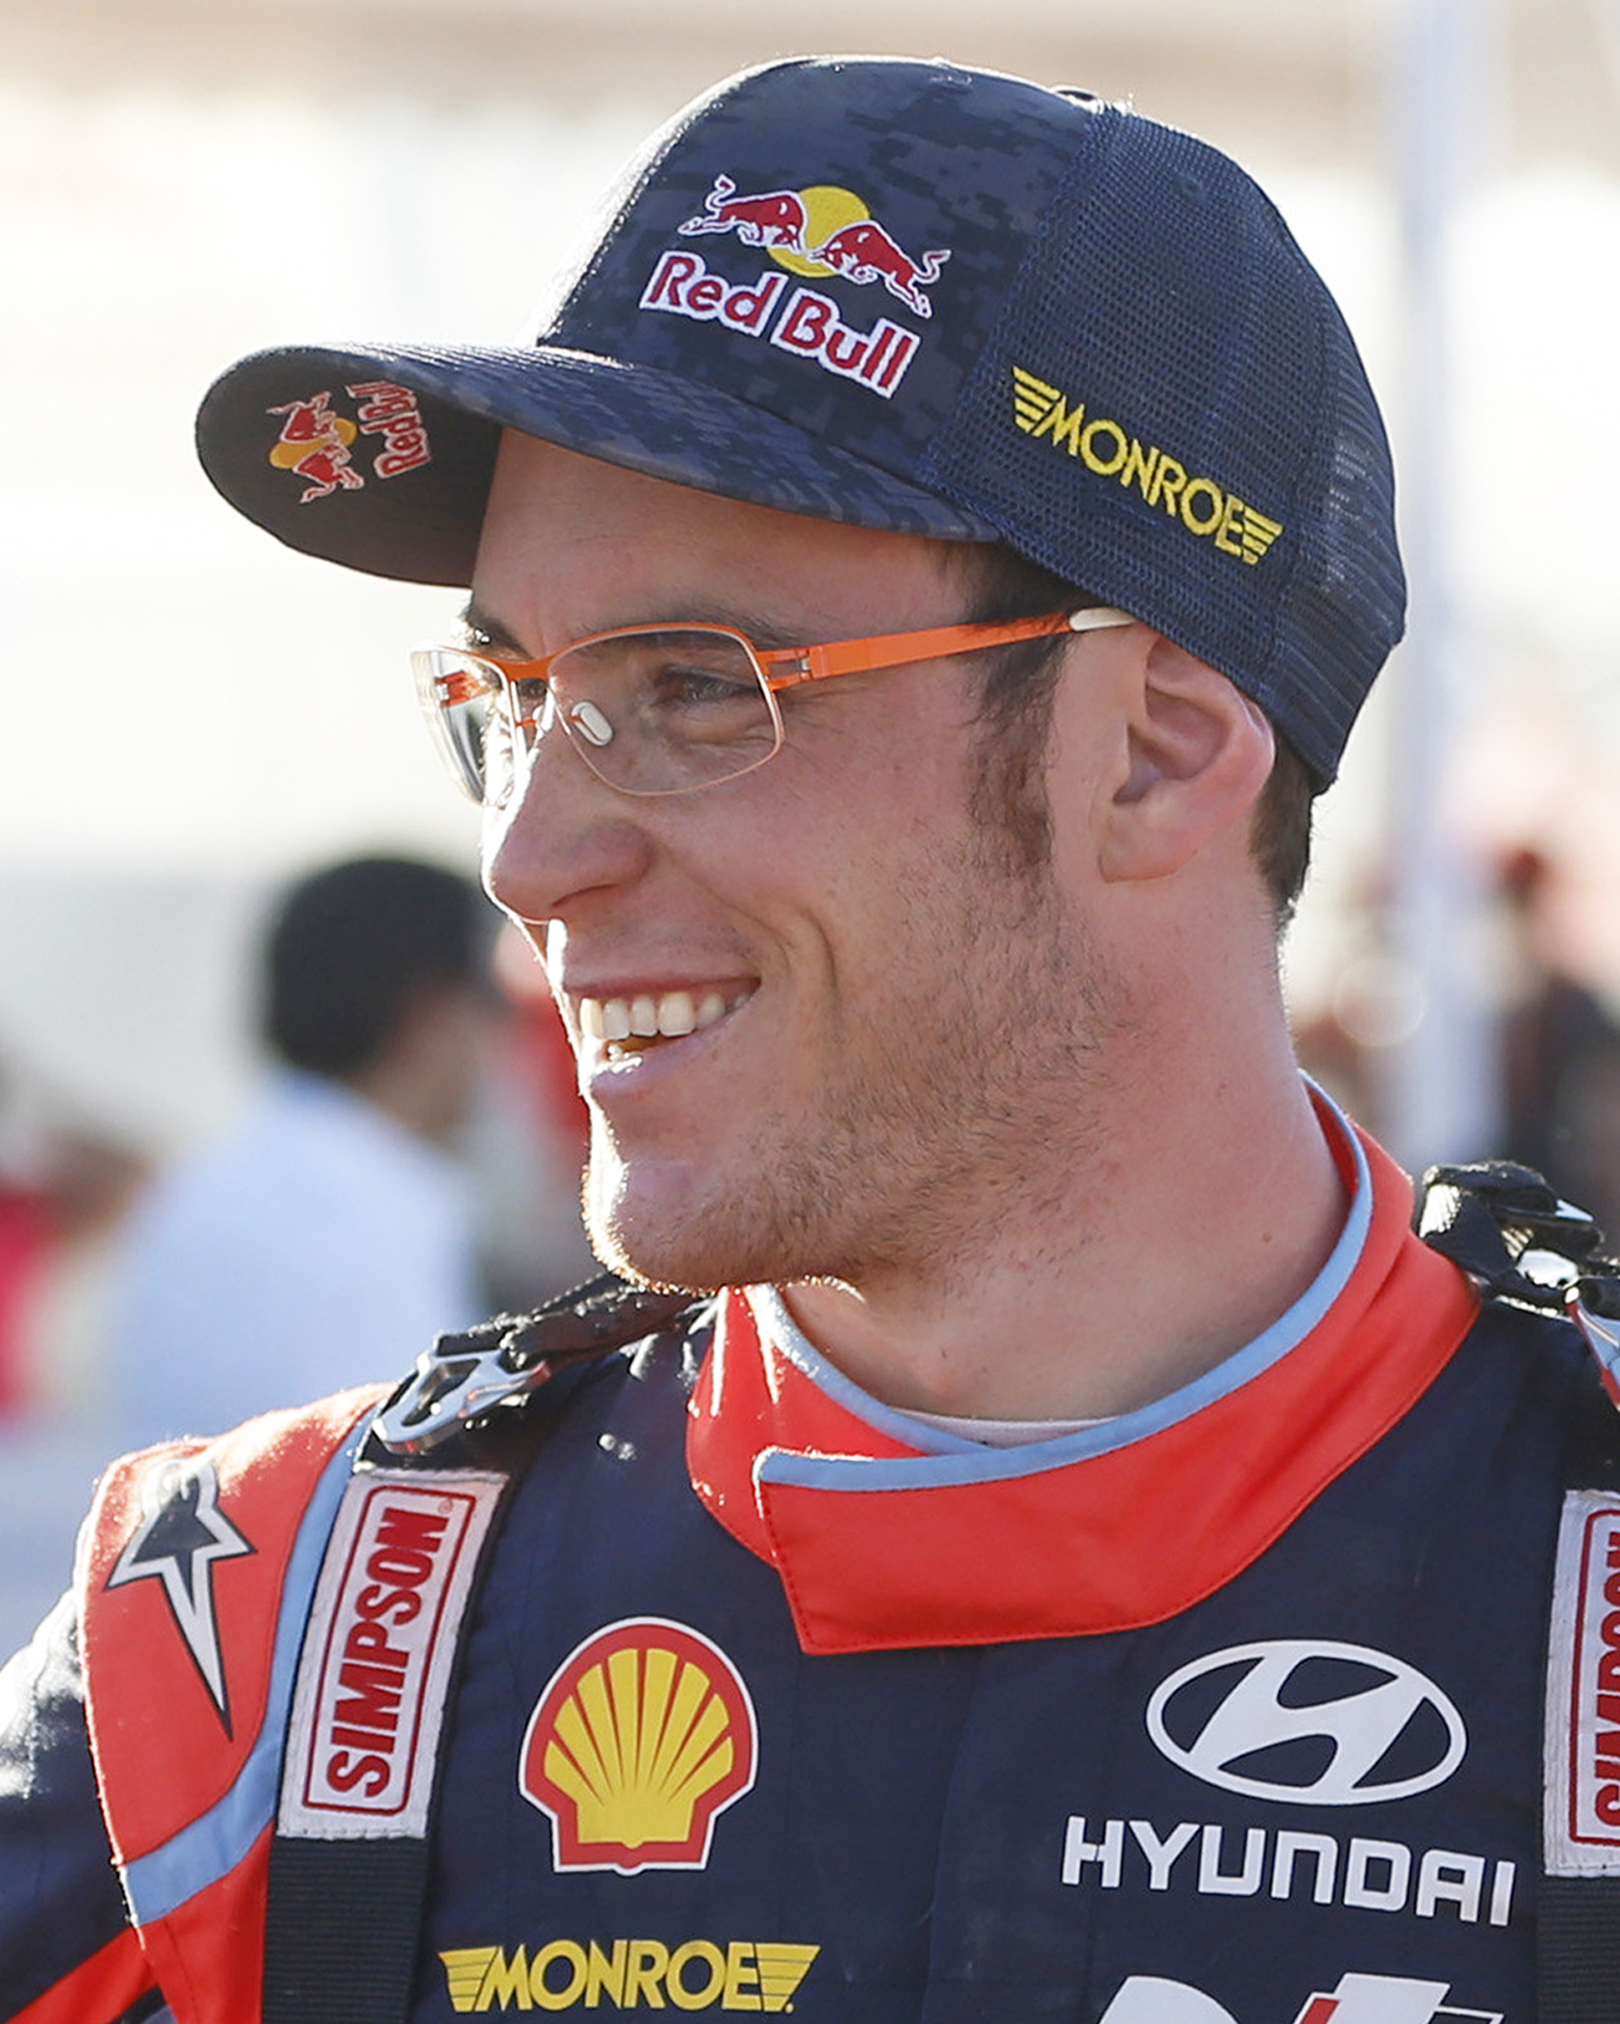 Rallying-Neuville wins in Spain as WRC title battle goes to wire